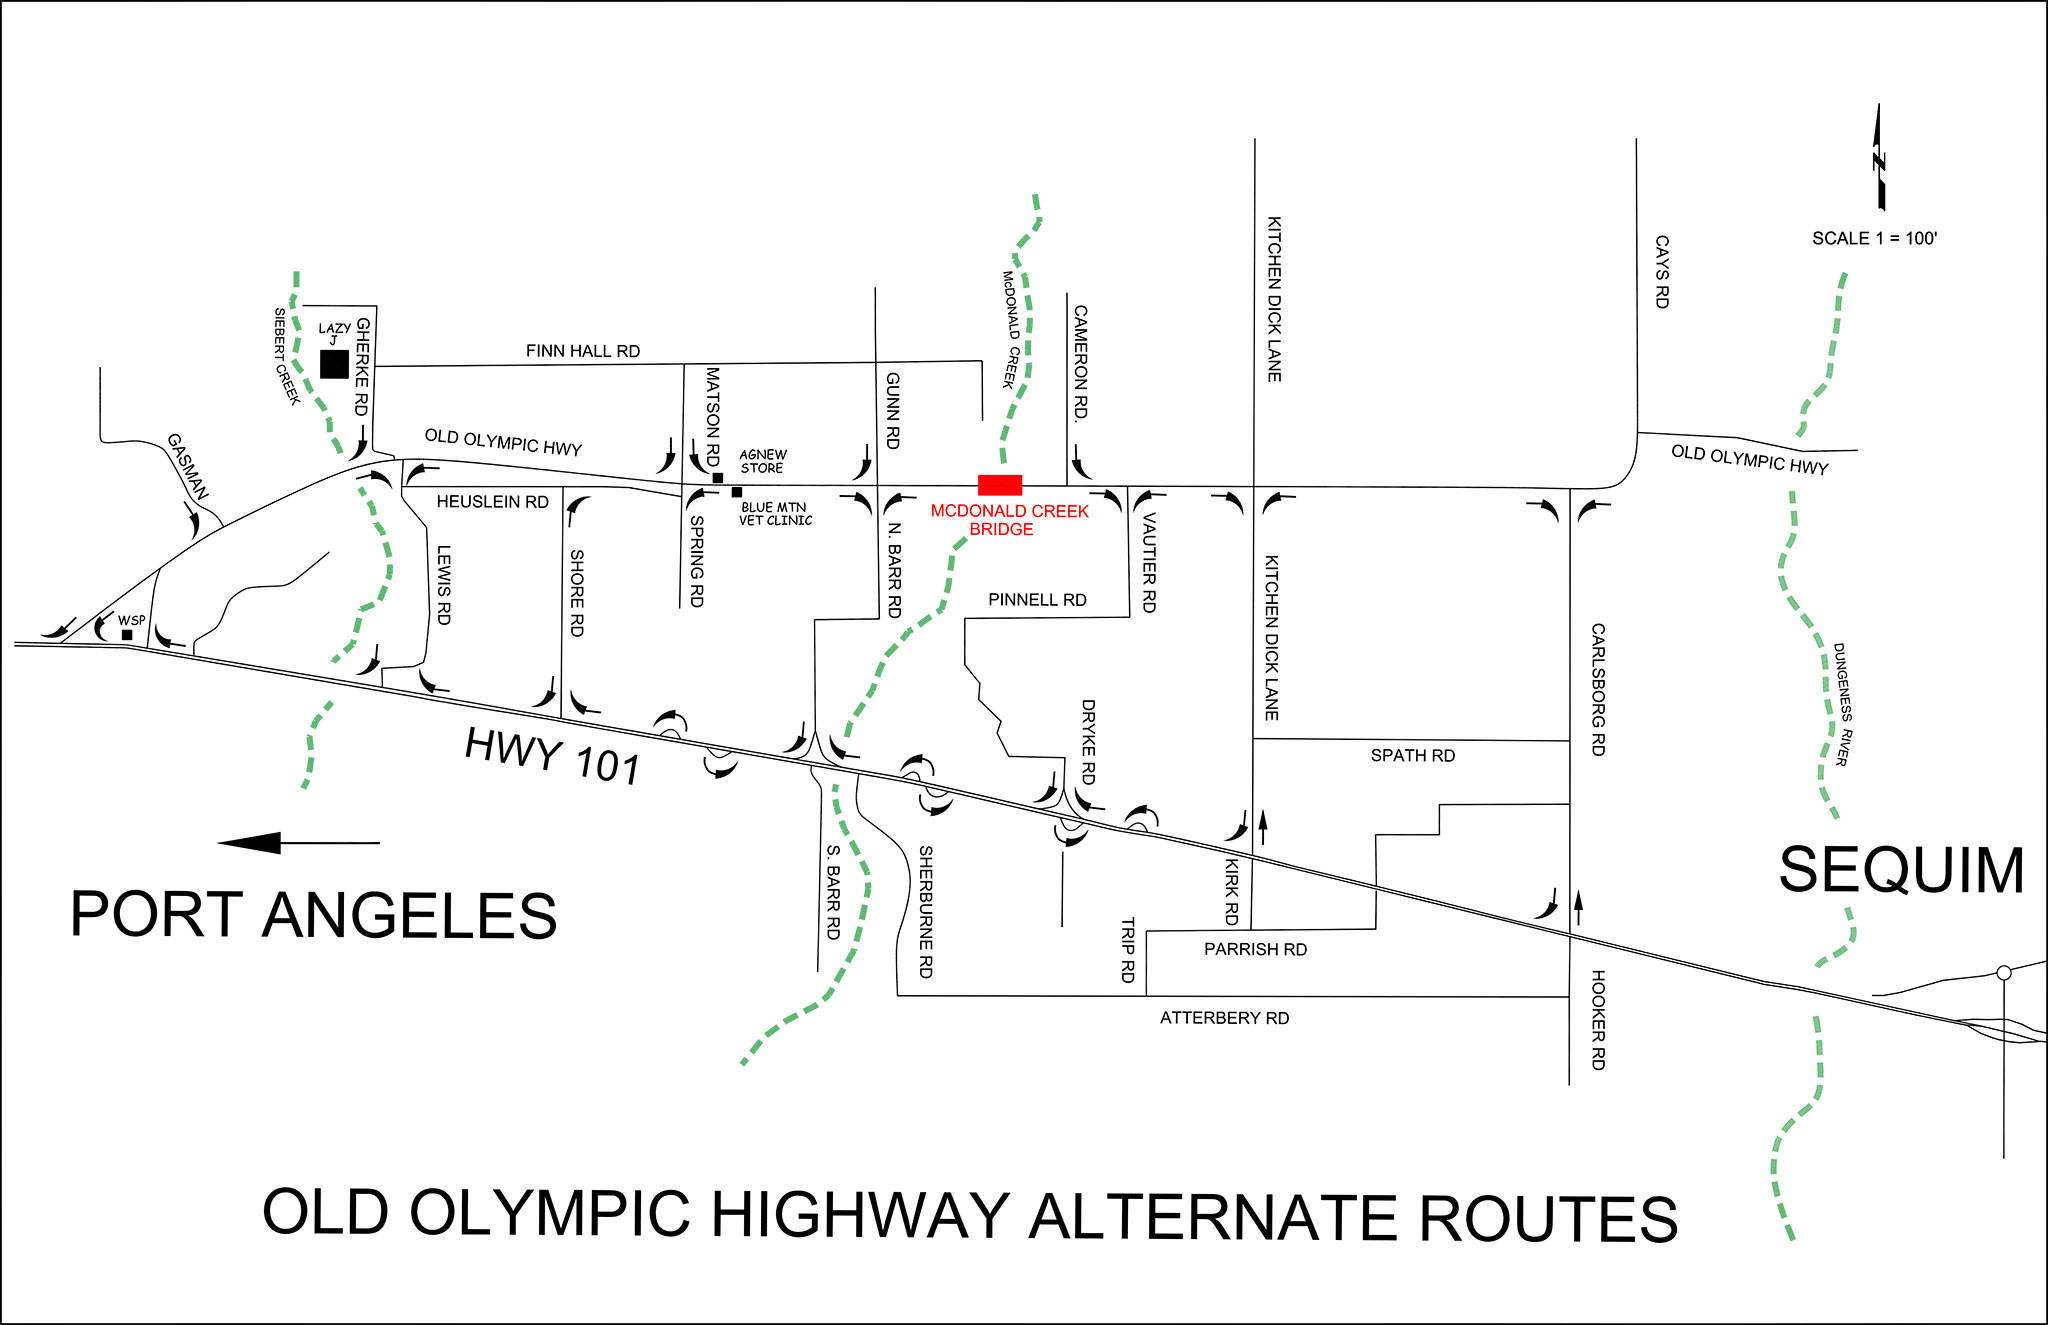 Clallam County officials plan to put out signs referring drivers to detours around the McDonald Creek Bridge closure along a portion of Old Olympic Highway. Map courtesy of Clallam County